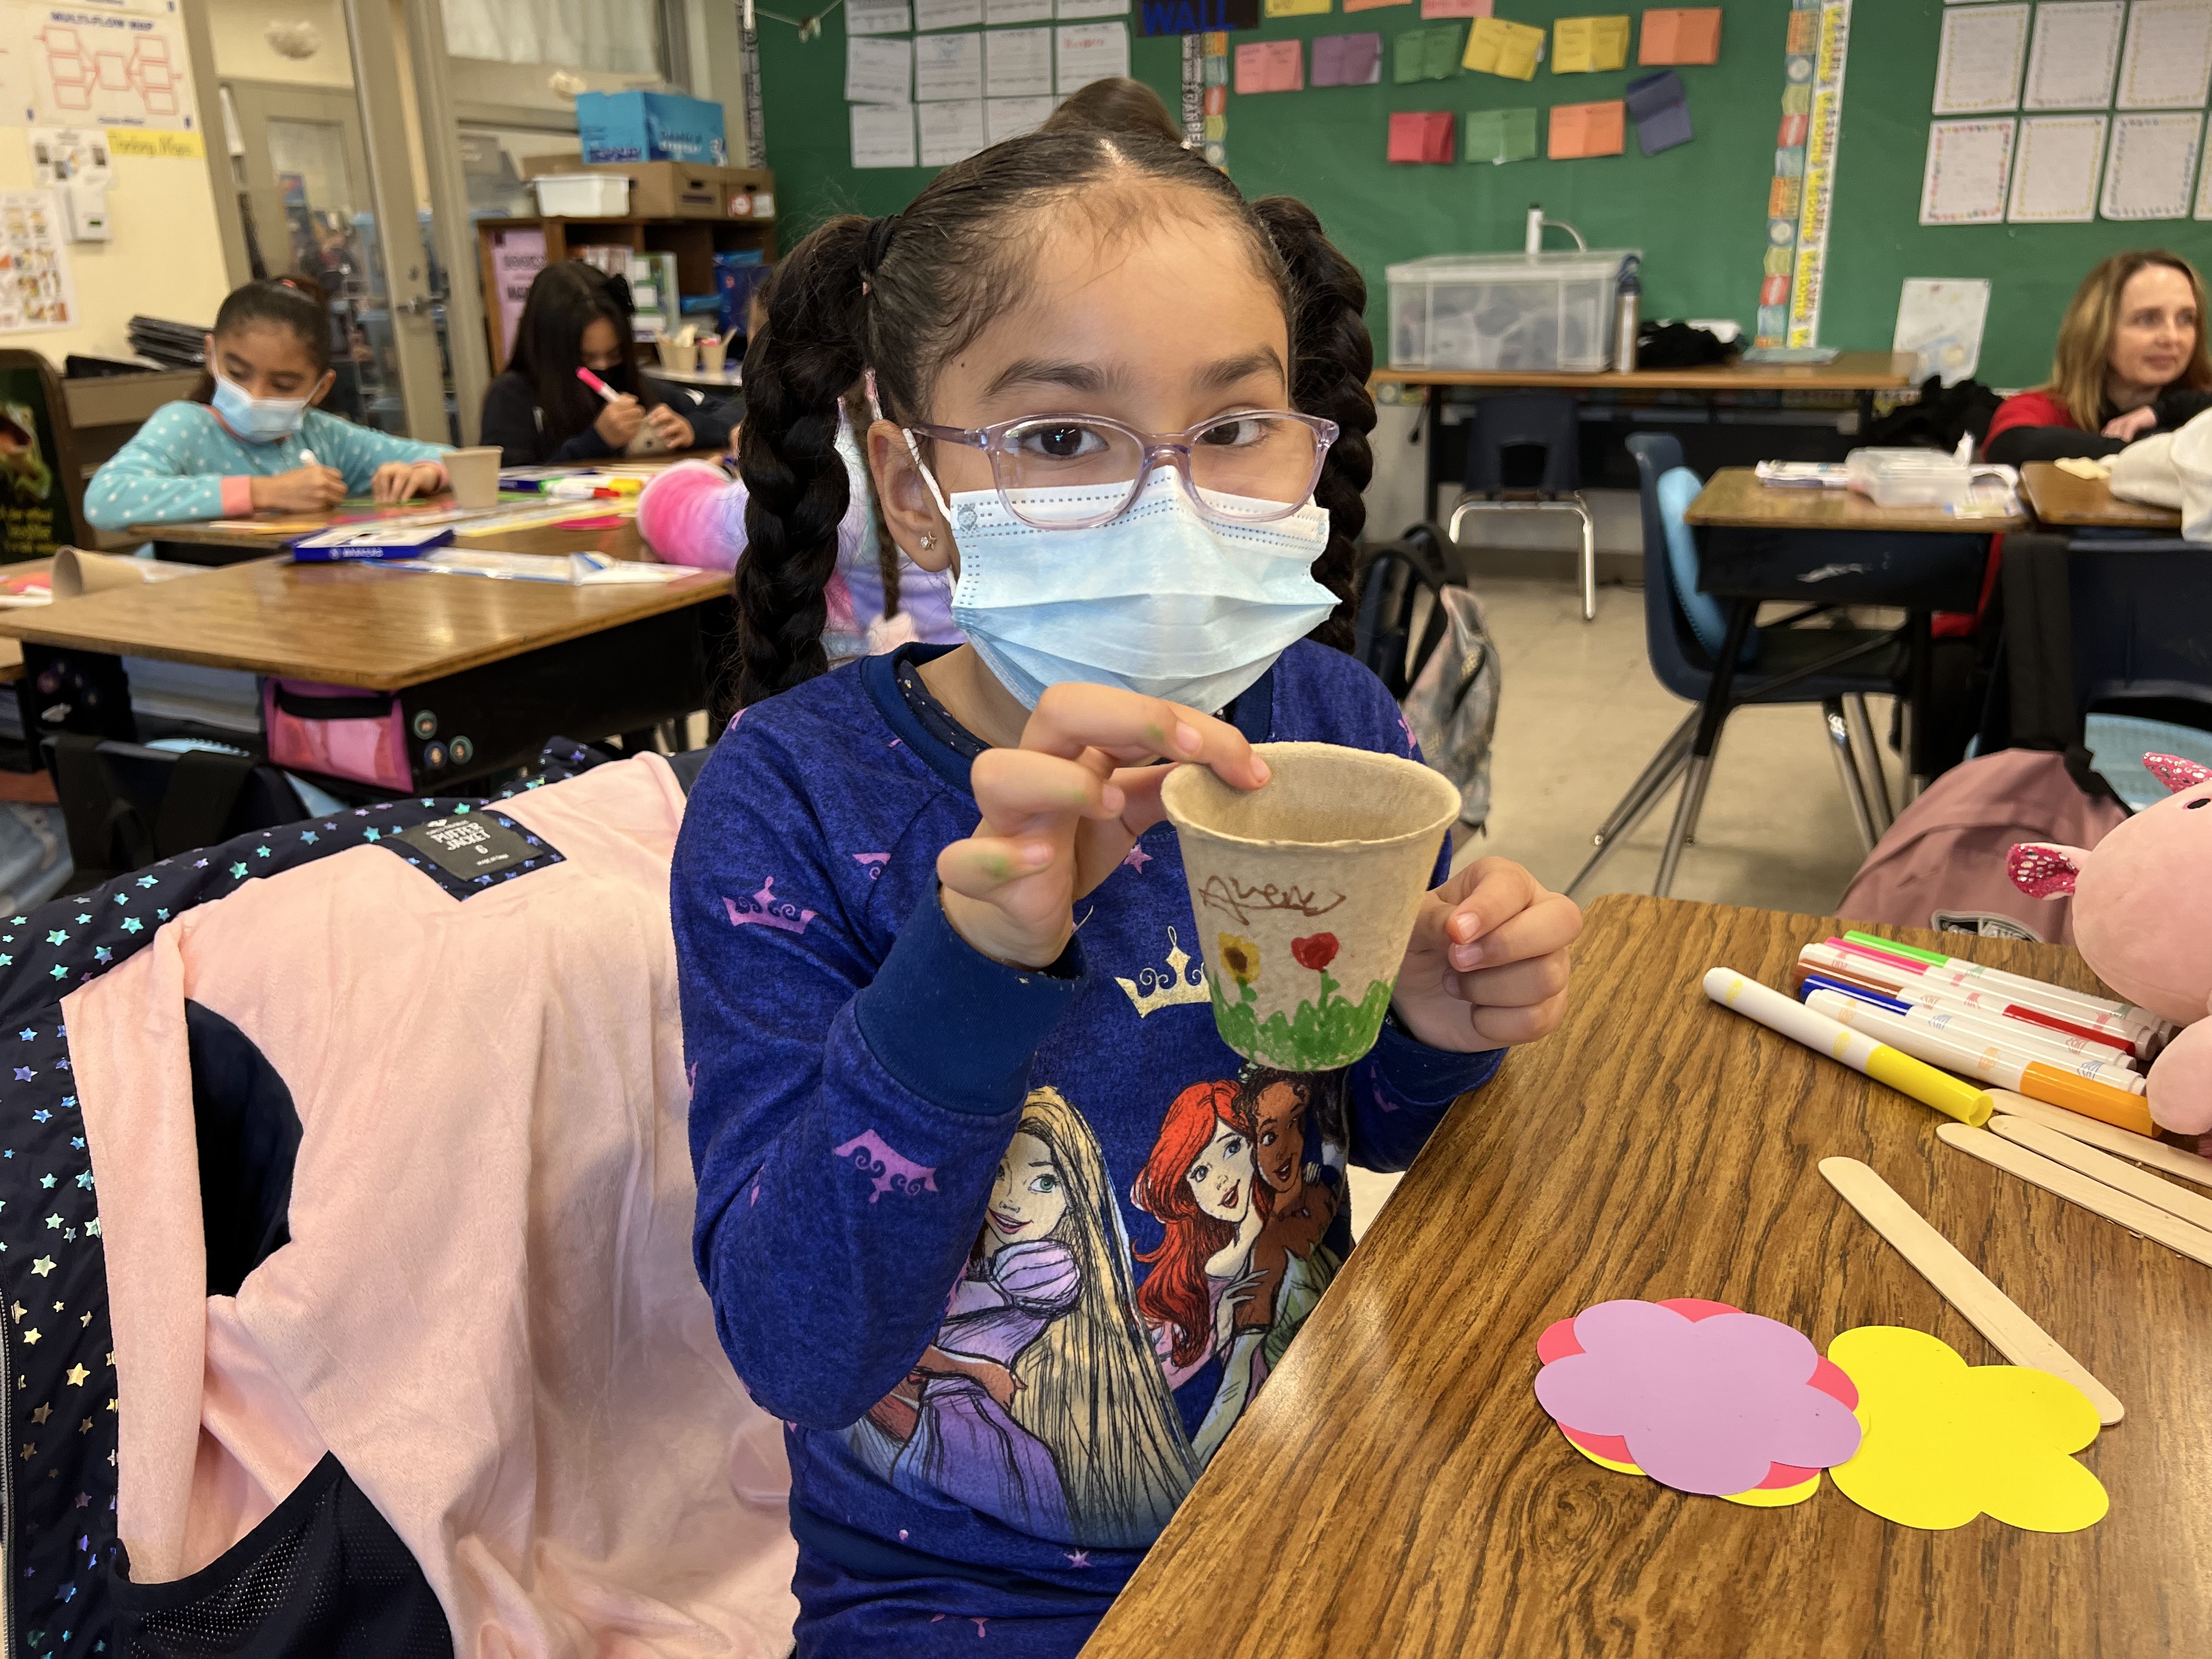 Student shares her pot she decorated after reading "Jayden's Impossible Garden."